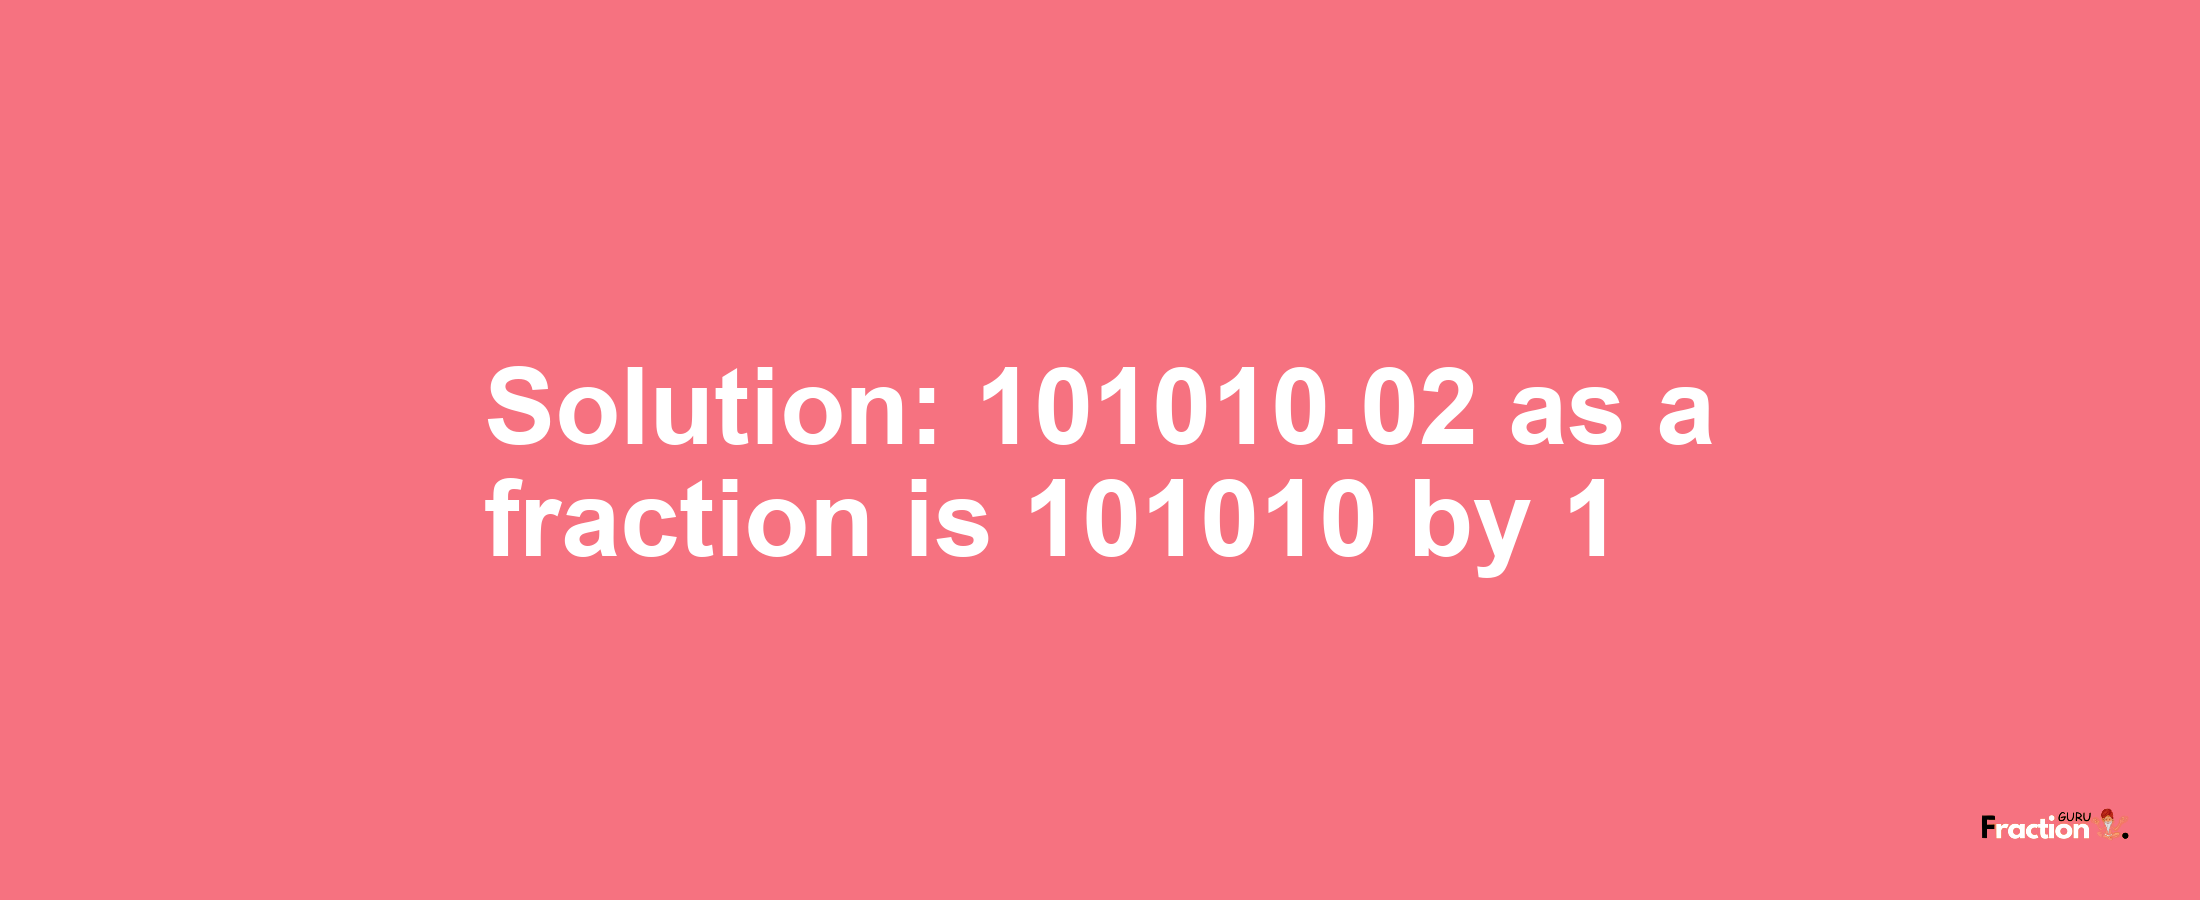 Solution:101010.02 as a fraction is 101010/1